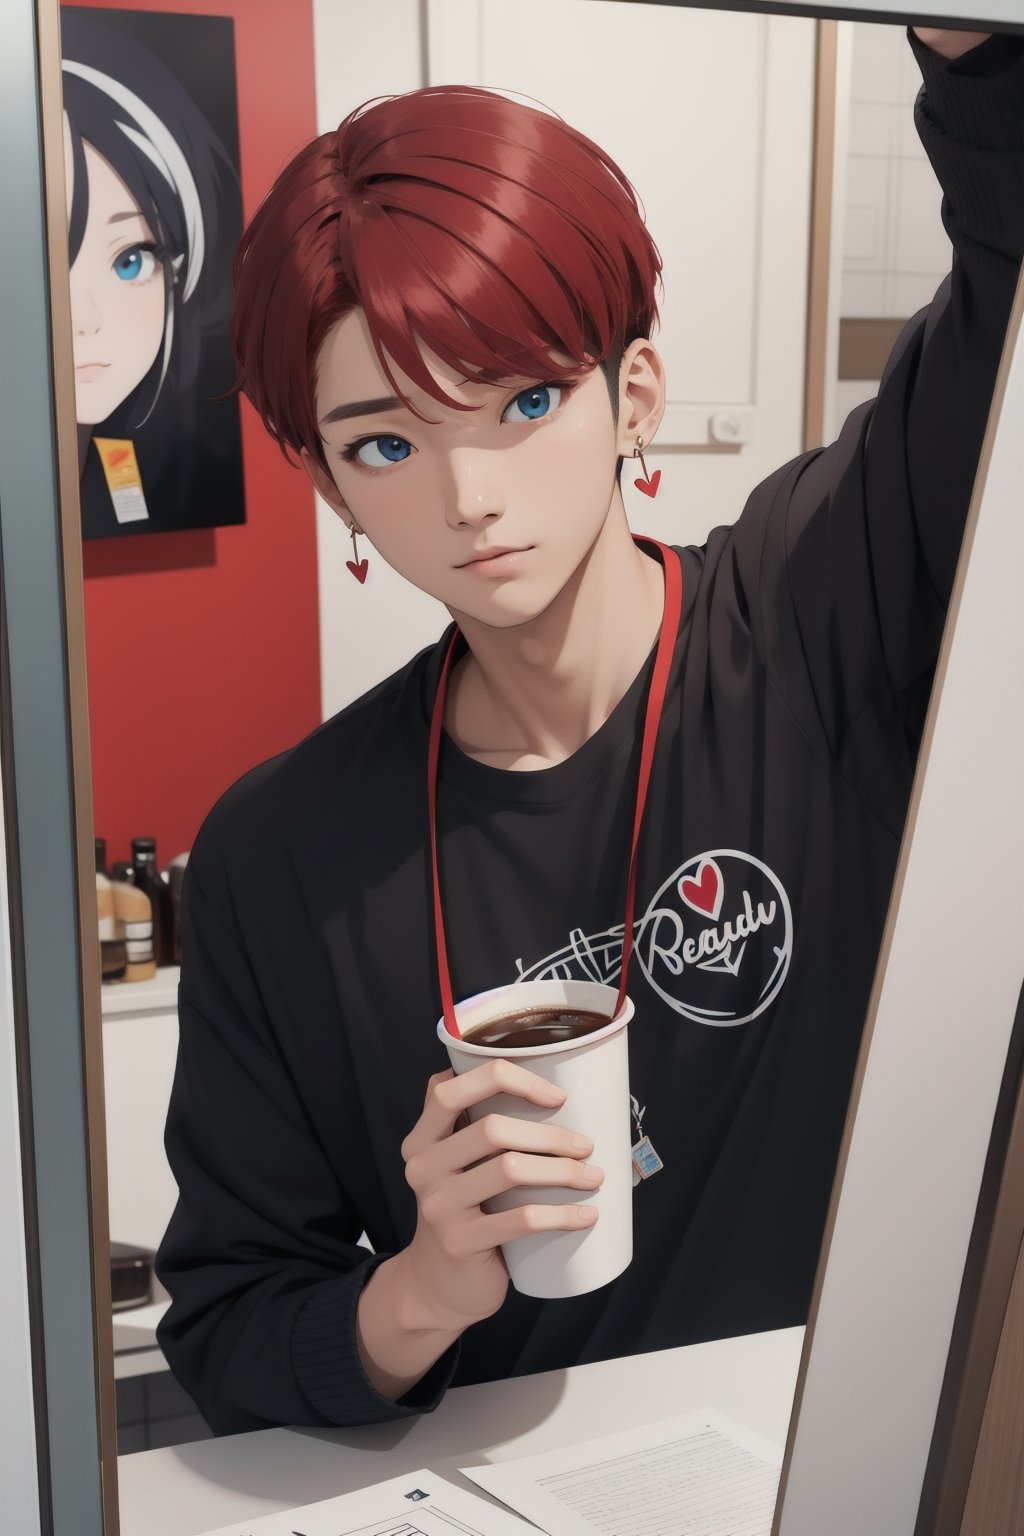 intricate detail, male face,ikemen, kpop, holding a paper coffee cup with heart logos, blue eyes, handsome, earrings, glittering wine red color hair with stylish hair style, selfie, stylish, black jacket and white T-shirt with vivid color design art, earrings, young handsome asian male, vivid color, infront of mirror, realistic skin color, realistic right reflection